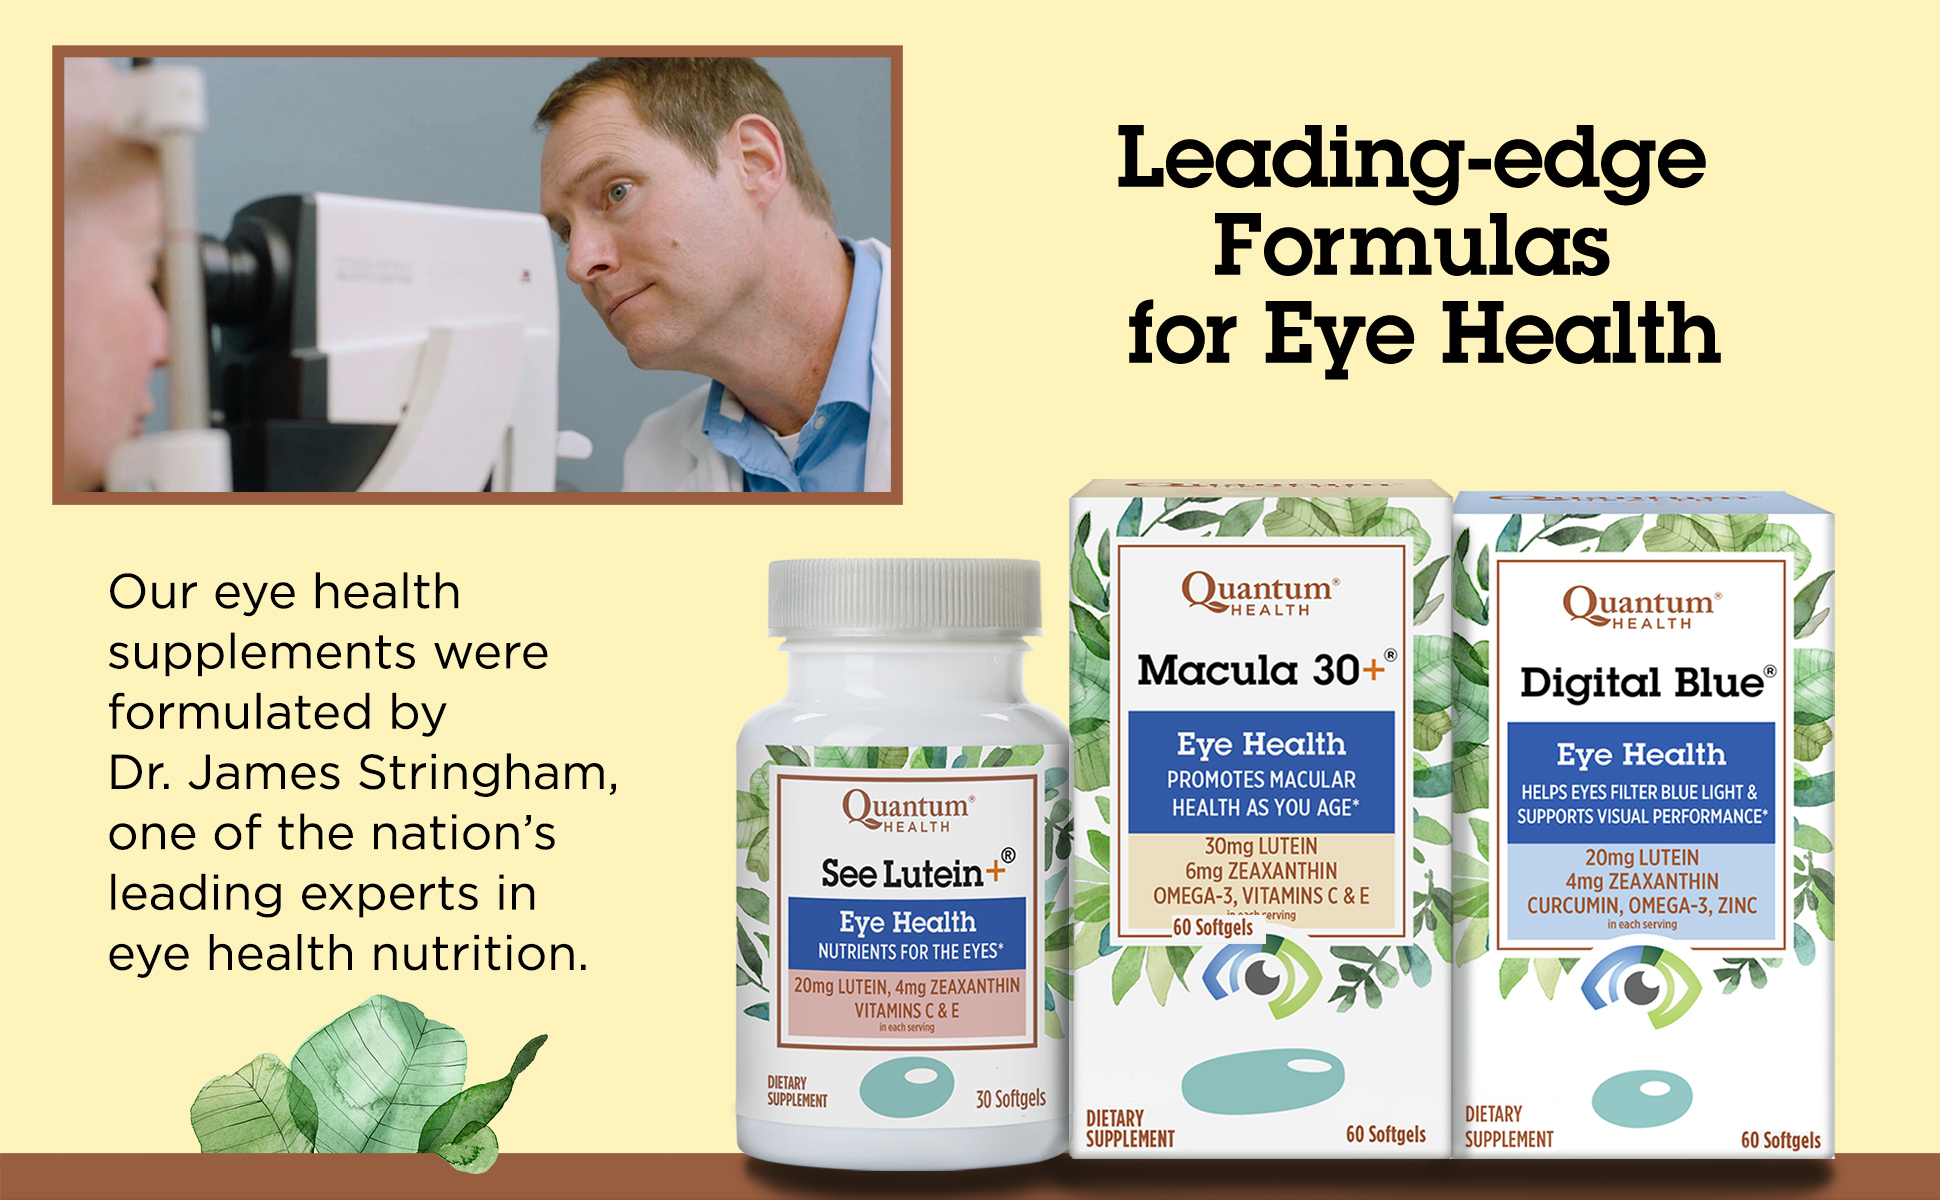 Our eye health supplements were formulated by Dr. James Stringham, one of the nation's leading experts in eye health nutrition.